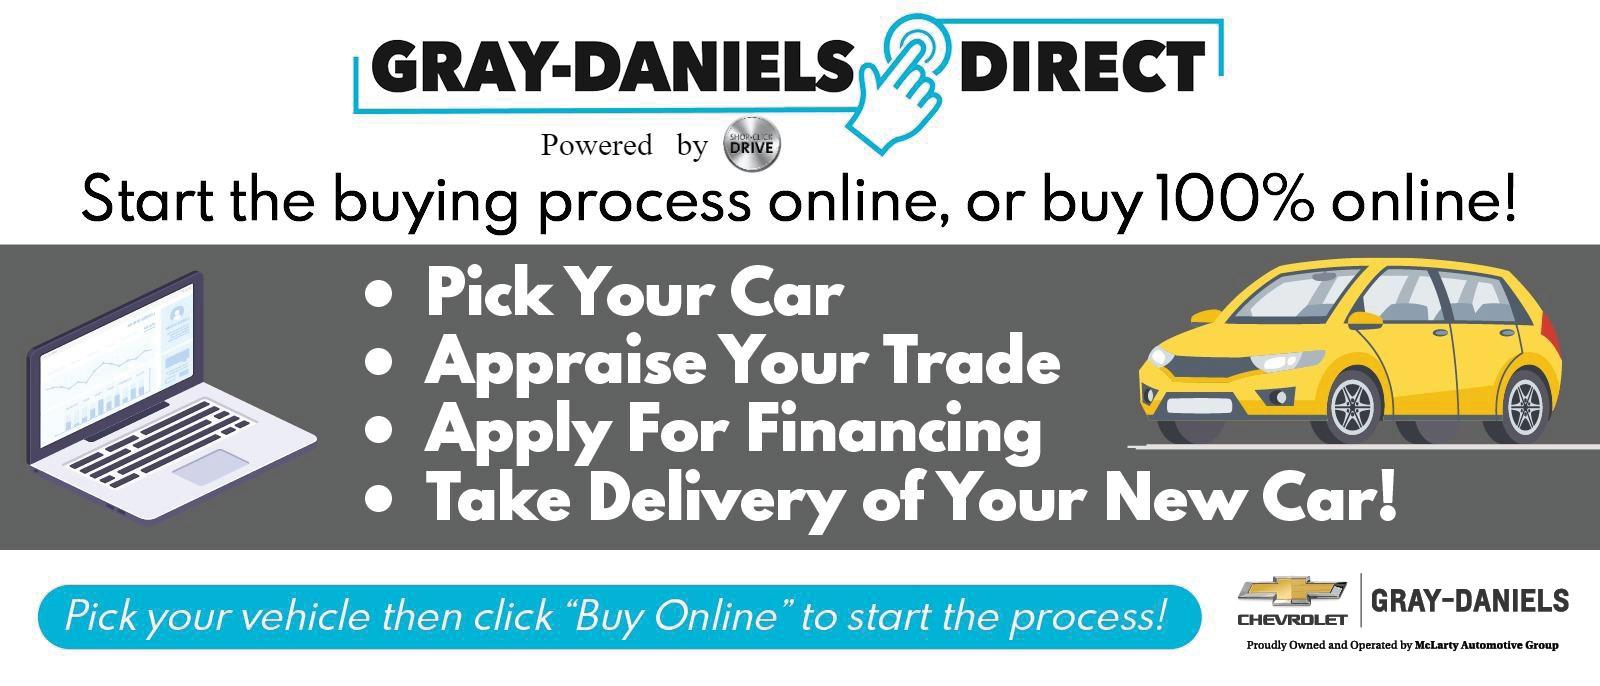 Gray-Daniels Direct, Powered by Shop Click Drive - Start the buying process online, or buy 100% online!